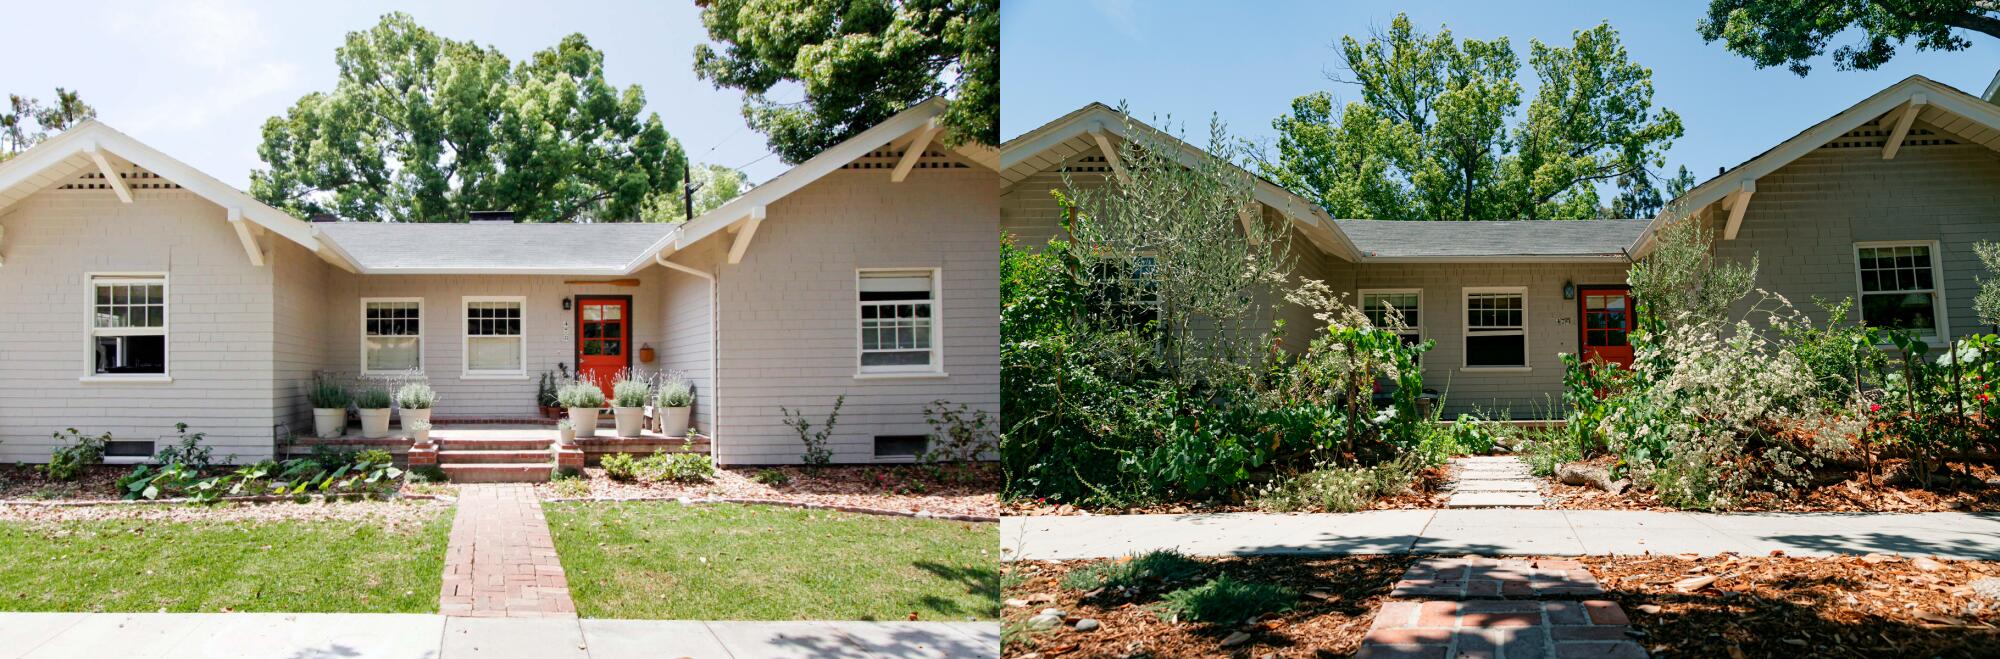 Left, a house with a green grass lawn; right, the same house with a brown mulch lawn 